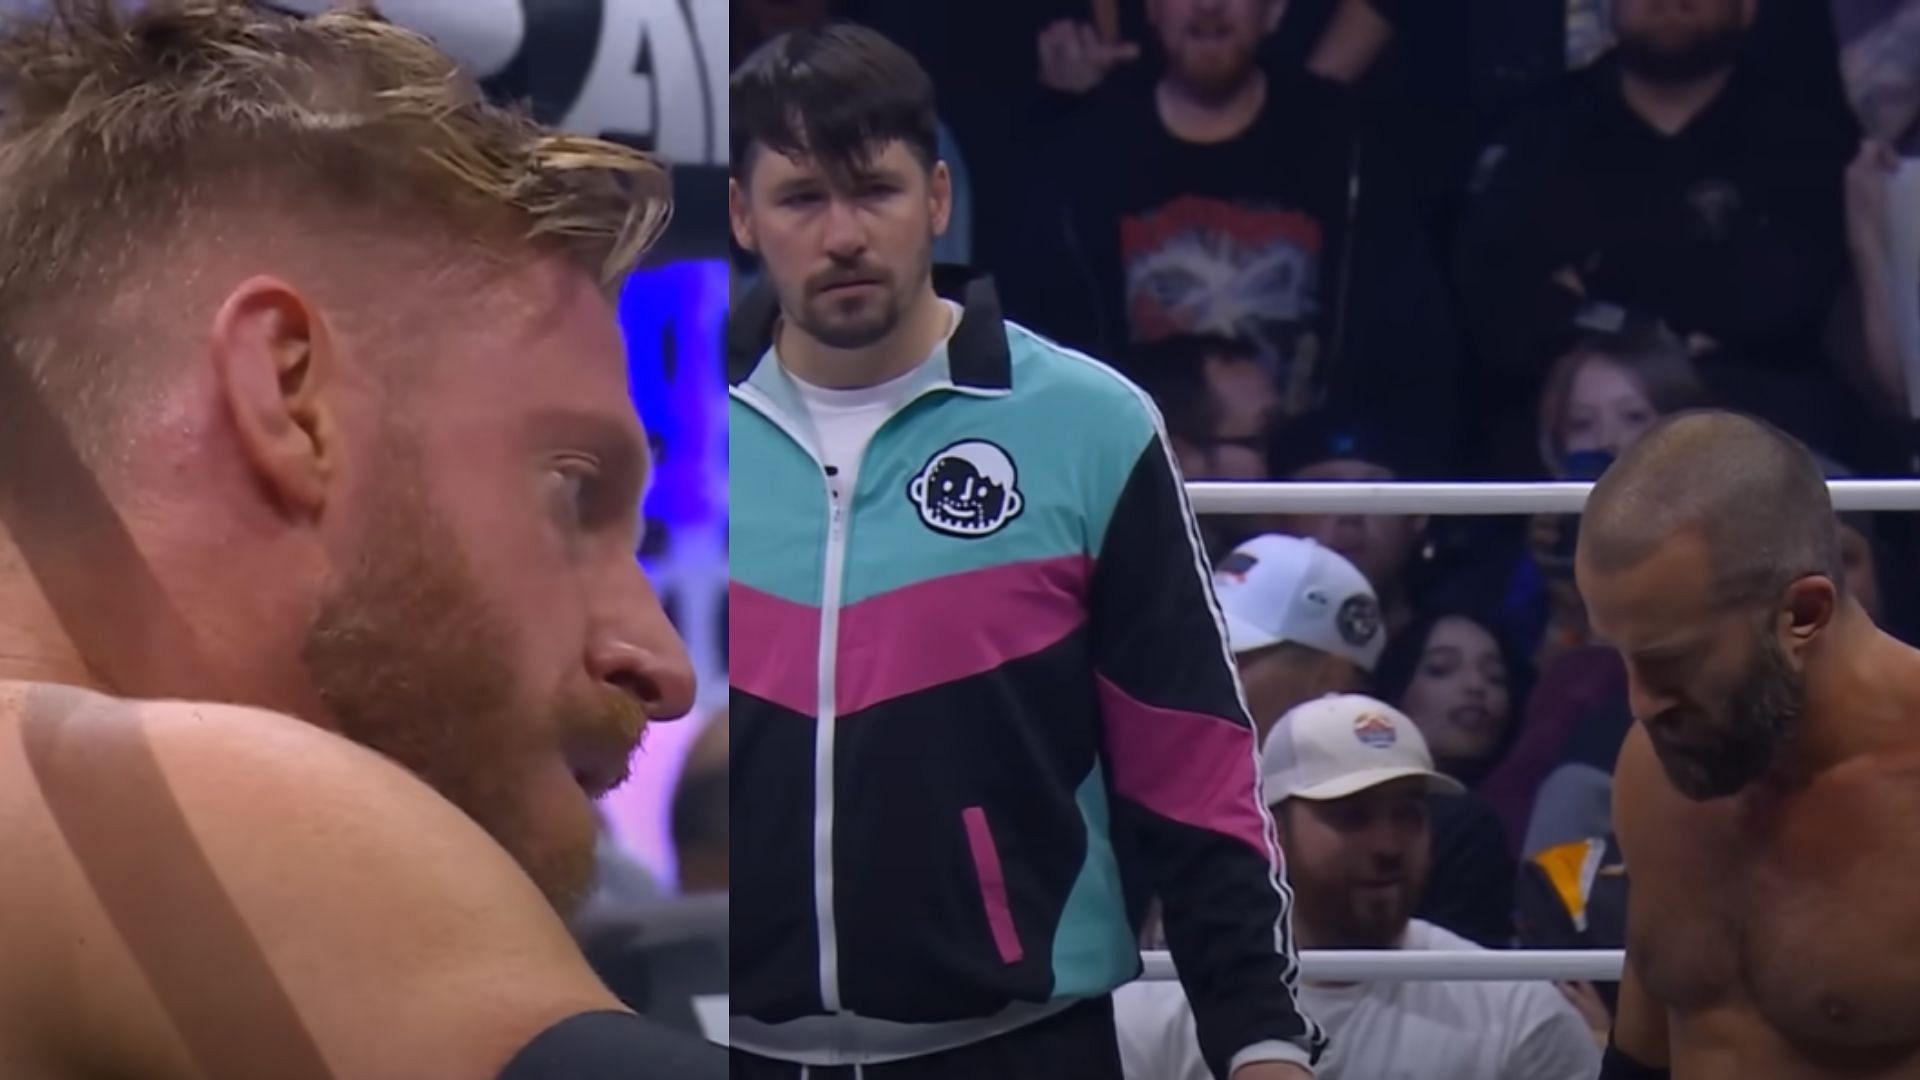 Best Friends seem to be going through a rough split up in AEW [Image Credits: AEW